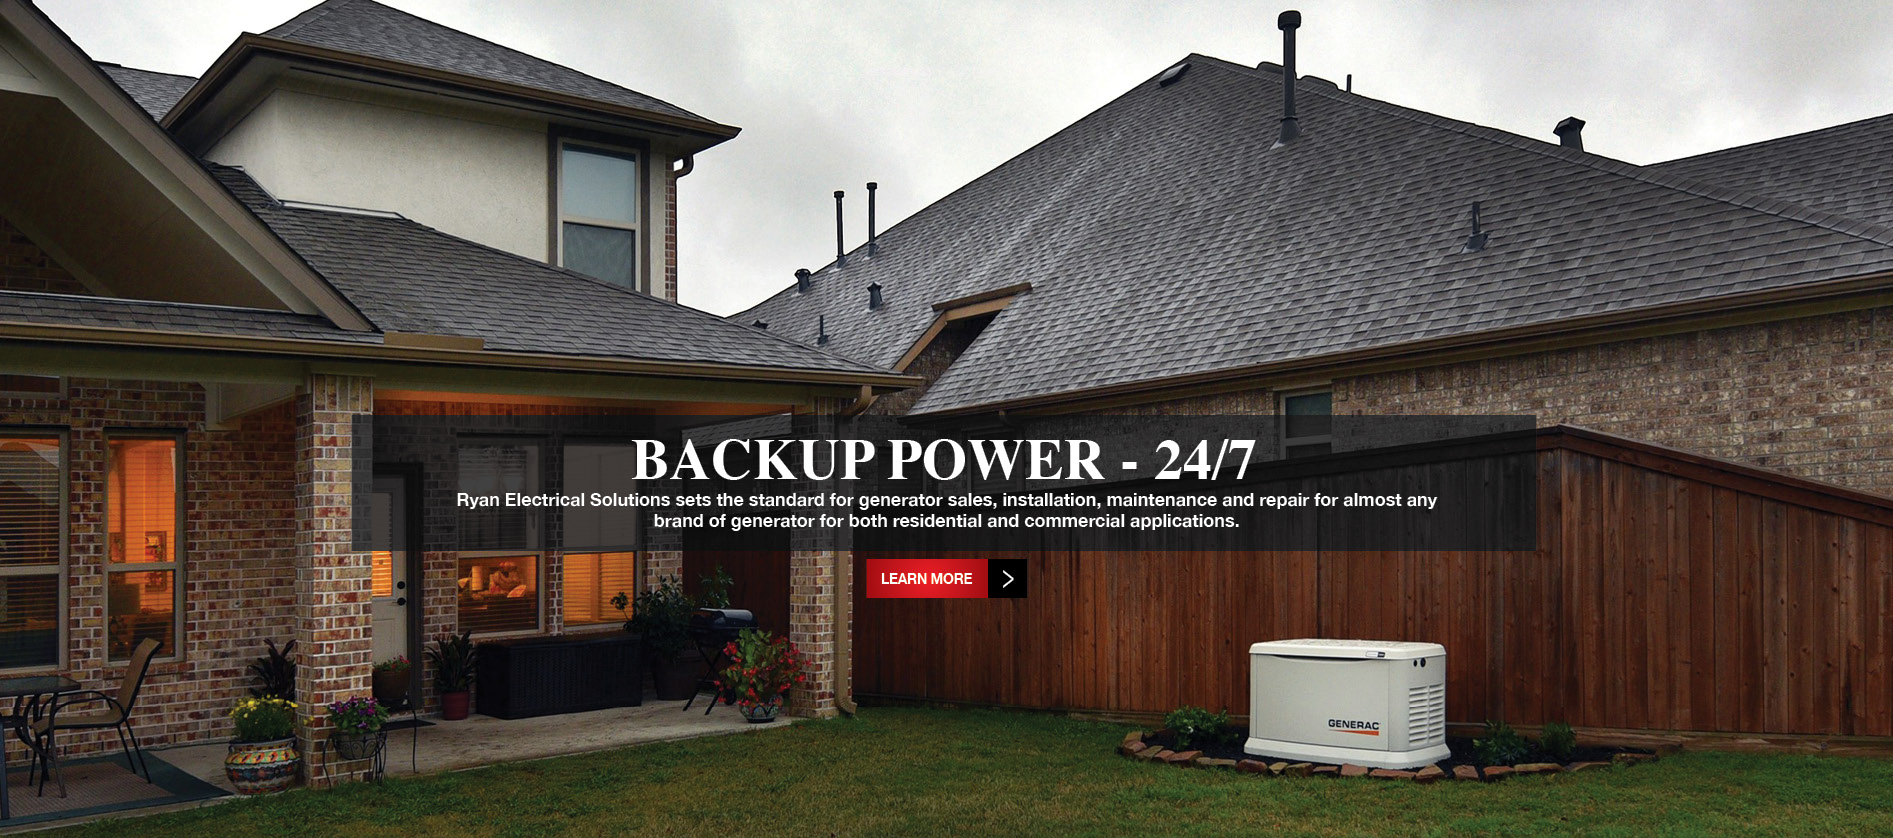 Backup Power - 24/7 - Ryan Electrical Solutions sets the standard for generator sales, installation, maintenance and repair for almost any brand of generator for both residential and commercial applications.